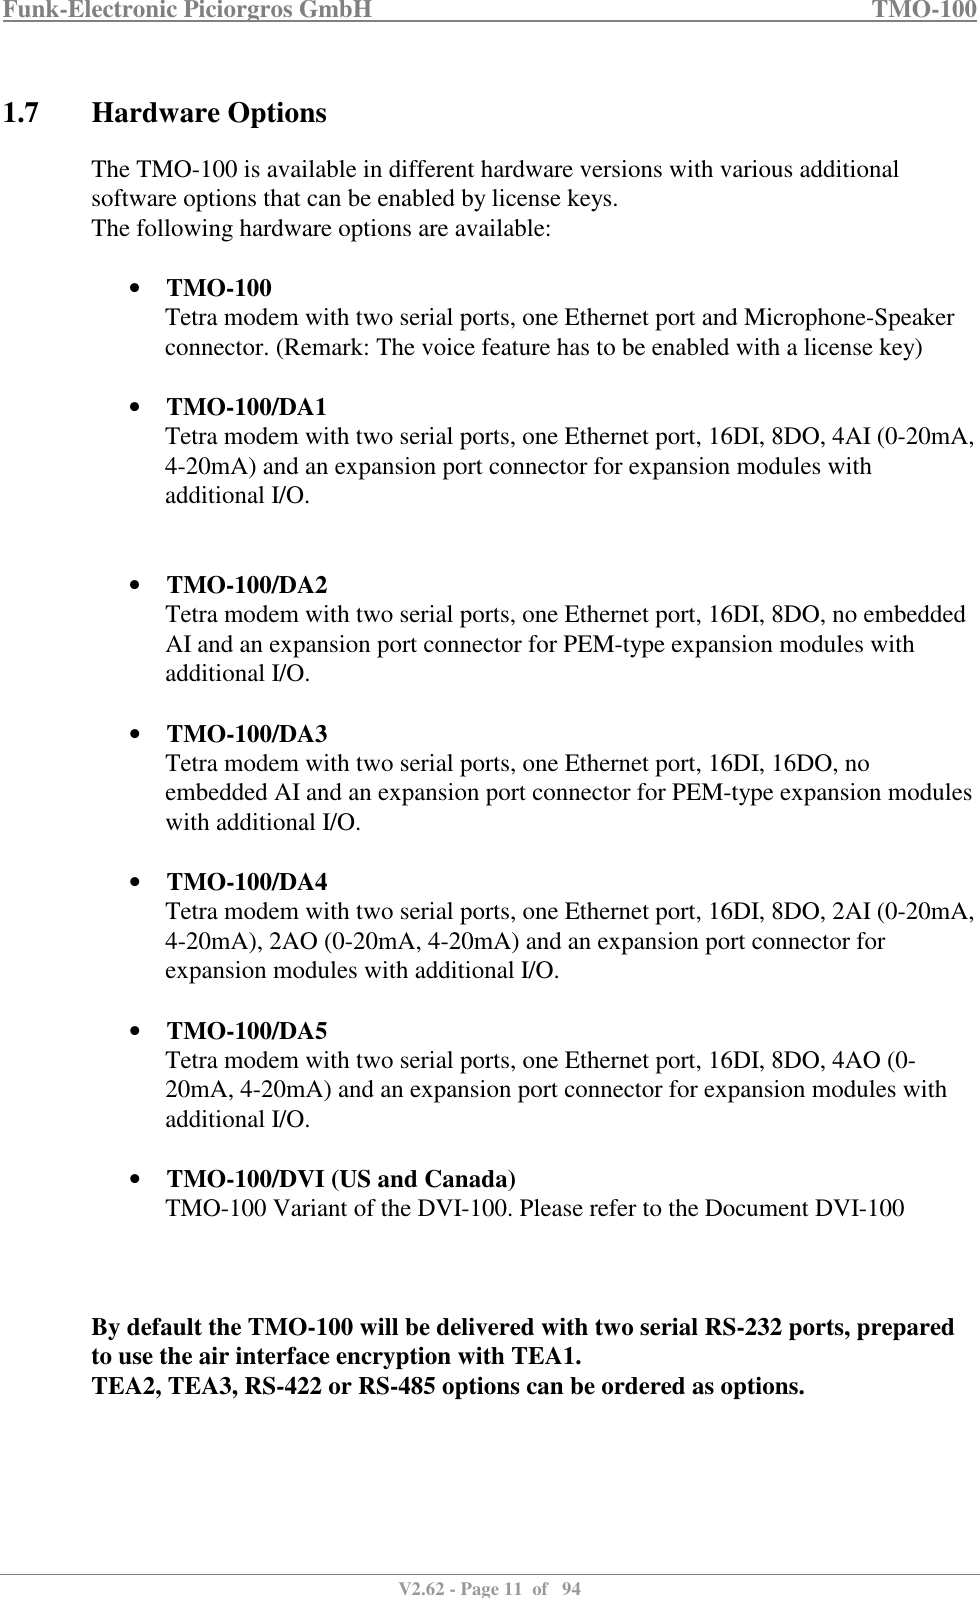 Funk-Electronic Piciorgros GmbH   TMO-100   V2.62 - Page 11  of   94   1.7 Hardware Options The TMO-100 is available in different hardware versions with various additional software options that can be enabled by license keys. The following hardware options are available:  • TMO-100 Tetra modem with two serial ports, one Ethernet port and Microphone-Speaker connector. (Remark: The voice feature has to be enabled with a license key)  • TMO-100/DA1 Tetra modem with two serial ports, one Ethernet port, 16DI, 8DO, 4AI (0-20mA, 4-20mA) and an expansion port connector for expansion modules with additional I/O.   • TMO-100/DA2 Tetra modem with two serial ports, one Ethernet port, 16DI, 8DO, no embedded AI and an expansion port connector for PEM-type expansion modules with additional I/O.  • TMO-100/DA3 Tetra modem with two serial ports, one Ethernet port, 16DI, 16DO, no embedded AI and an expansion port connector for PEM-type expansion modules with additional I/O.  • TMO-100/DA4 Tetra modem with two serial ports, one Ethernet port, 16DI, 8DO, 2AI (0-20mA, 4-20mA), 2AO (0-20mA, 4-20mA) and an expansion port connector for expansion modules with additional I/O.  • TMO-100/DA5 Tetra modem with two serial ports, one Ethernet port, 16DI, 8DO, 4AO (0-20mA, 4-20mA) and an expansion port connector for expansion modules with additional I/O.  • TMO-100/DVI (US and Canada) TMO-100 Variant of the DVI-100. Please refer to the Document DVI-100    By default the TMO-100 will be delivered with two serial RS-232 ports, prepared to use the air interface encryption with TEA1.  TEA2, TEA3, RS-422 or RS-485 options can be ordered as options.    